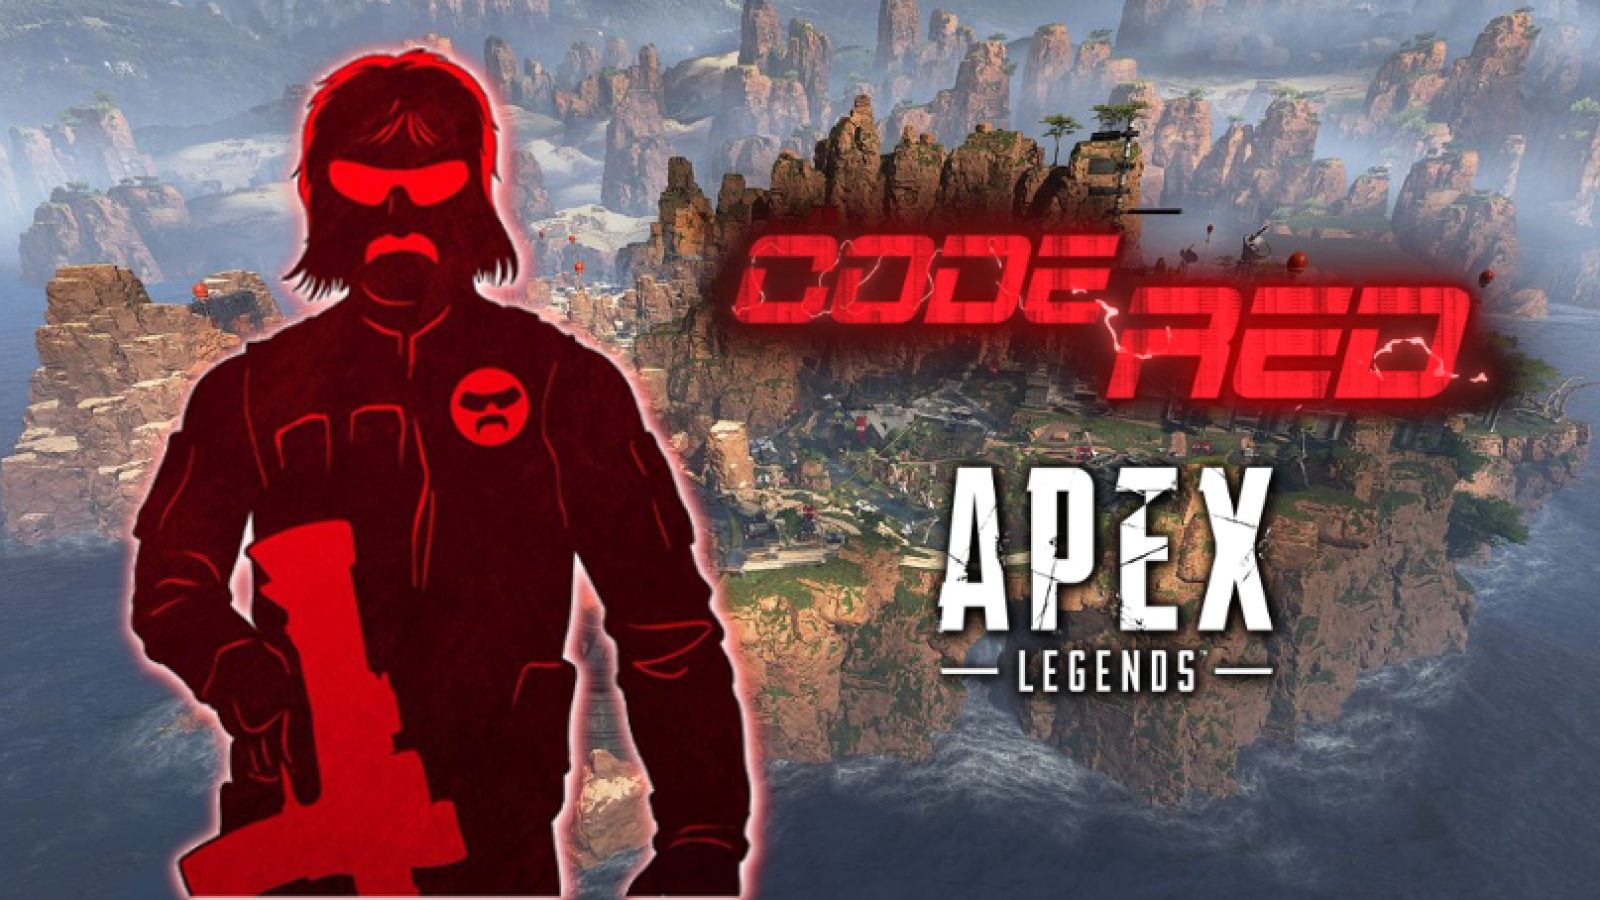 slap af forvrængning forord How to watch $25,000 Code Red Apex Legends tournament ft Dr Disrespect,  dizzy, and more – streams, bracket, format, teams - Dexerto